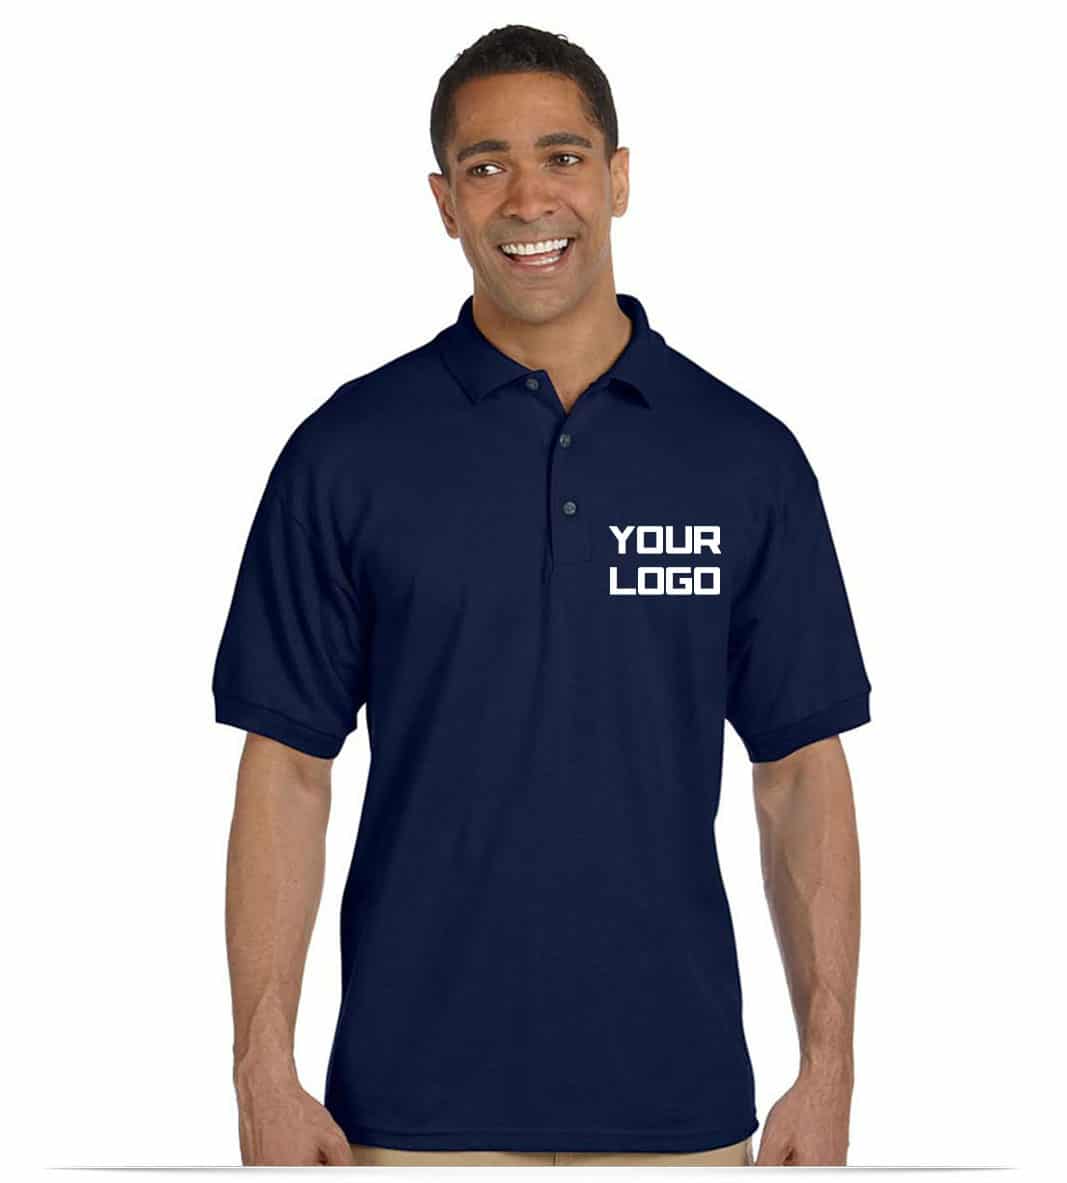 Embroidered Logo Golf Shirt With Customized Design Online